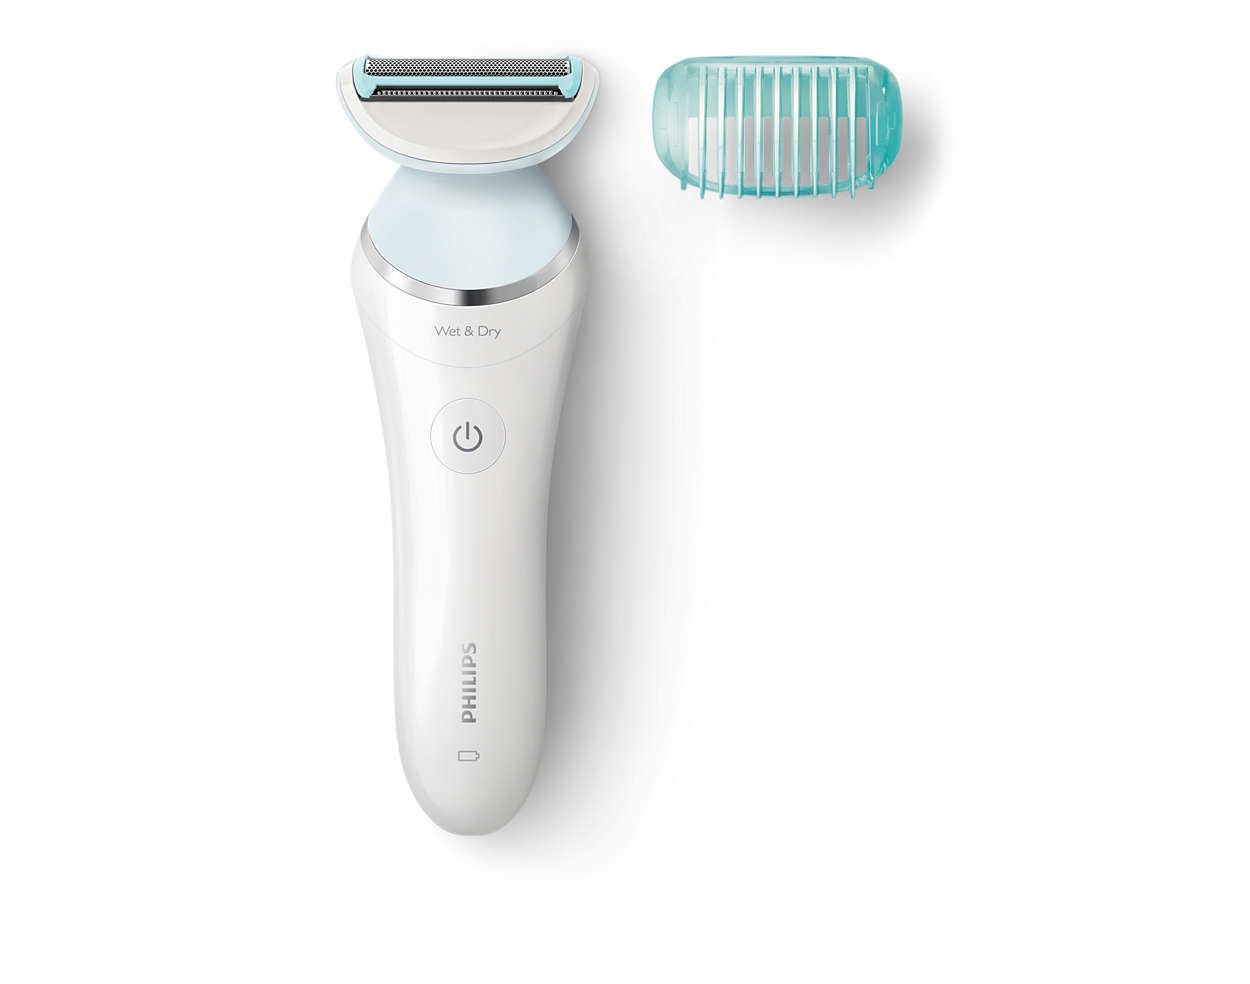 Glides smoothly for a skin-friendly shave